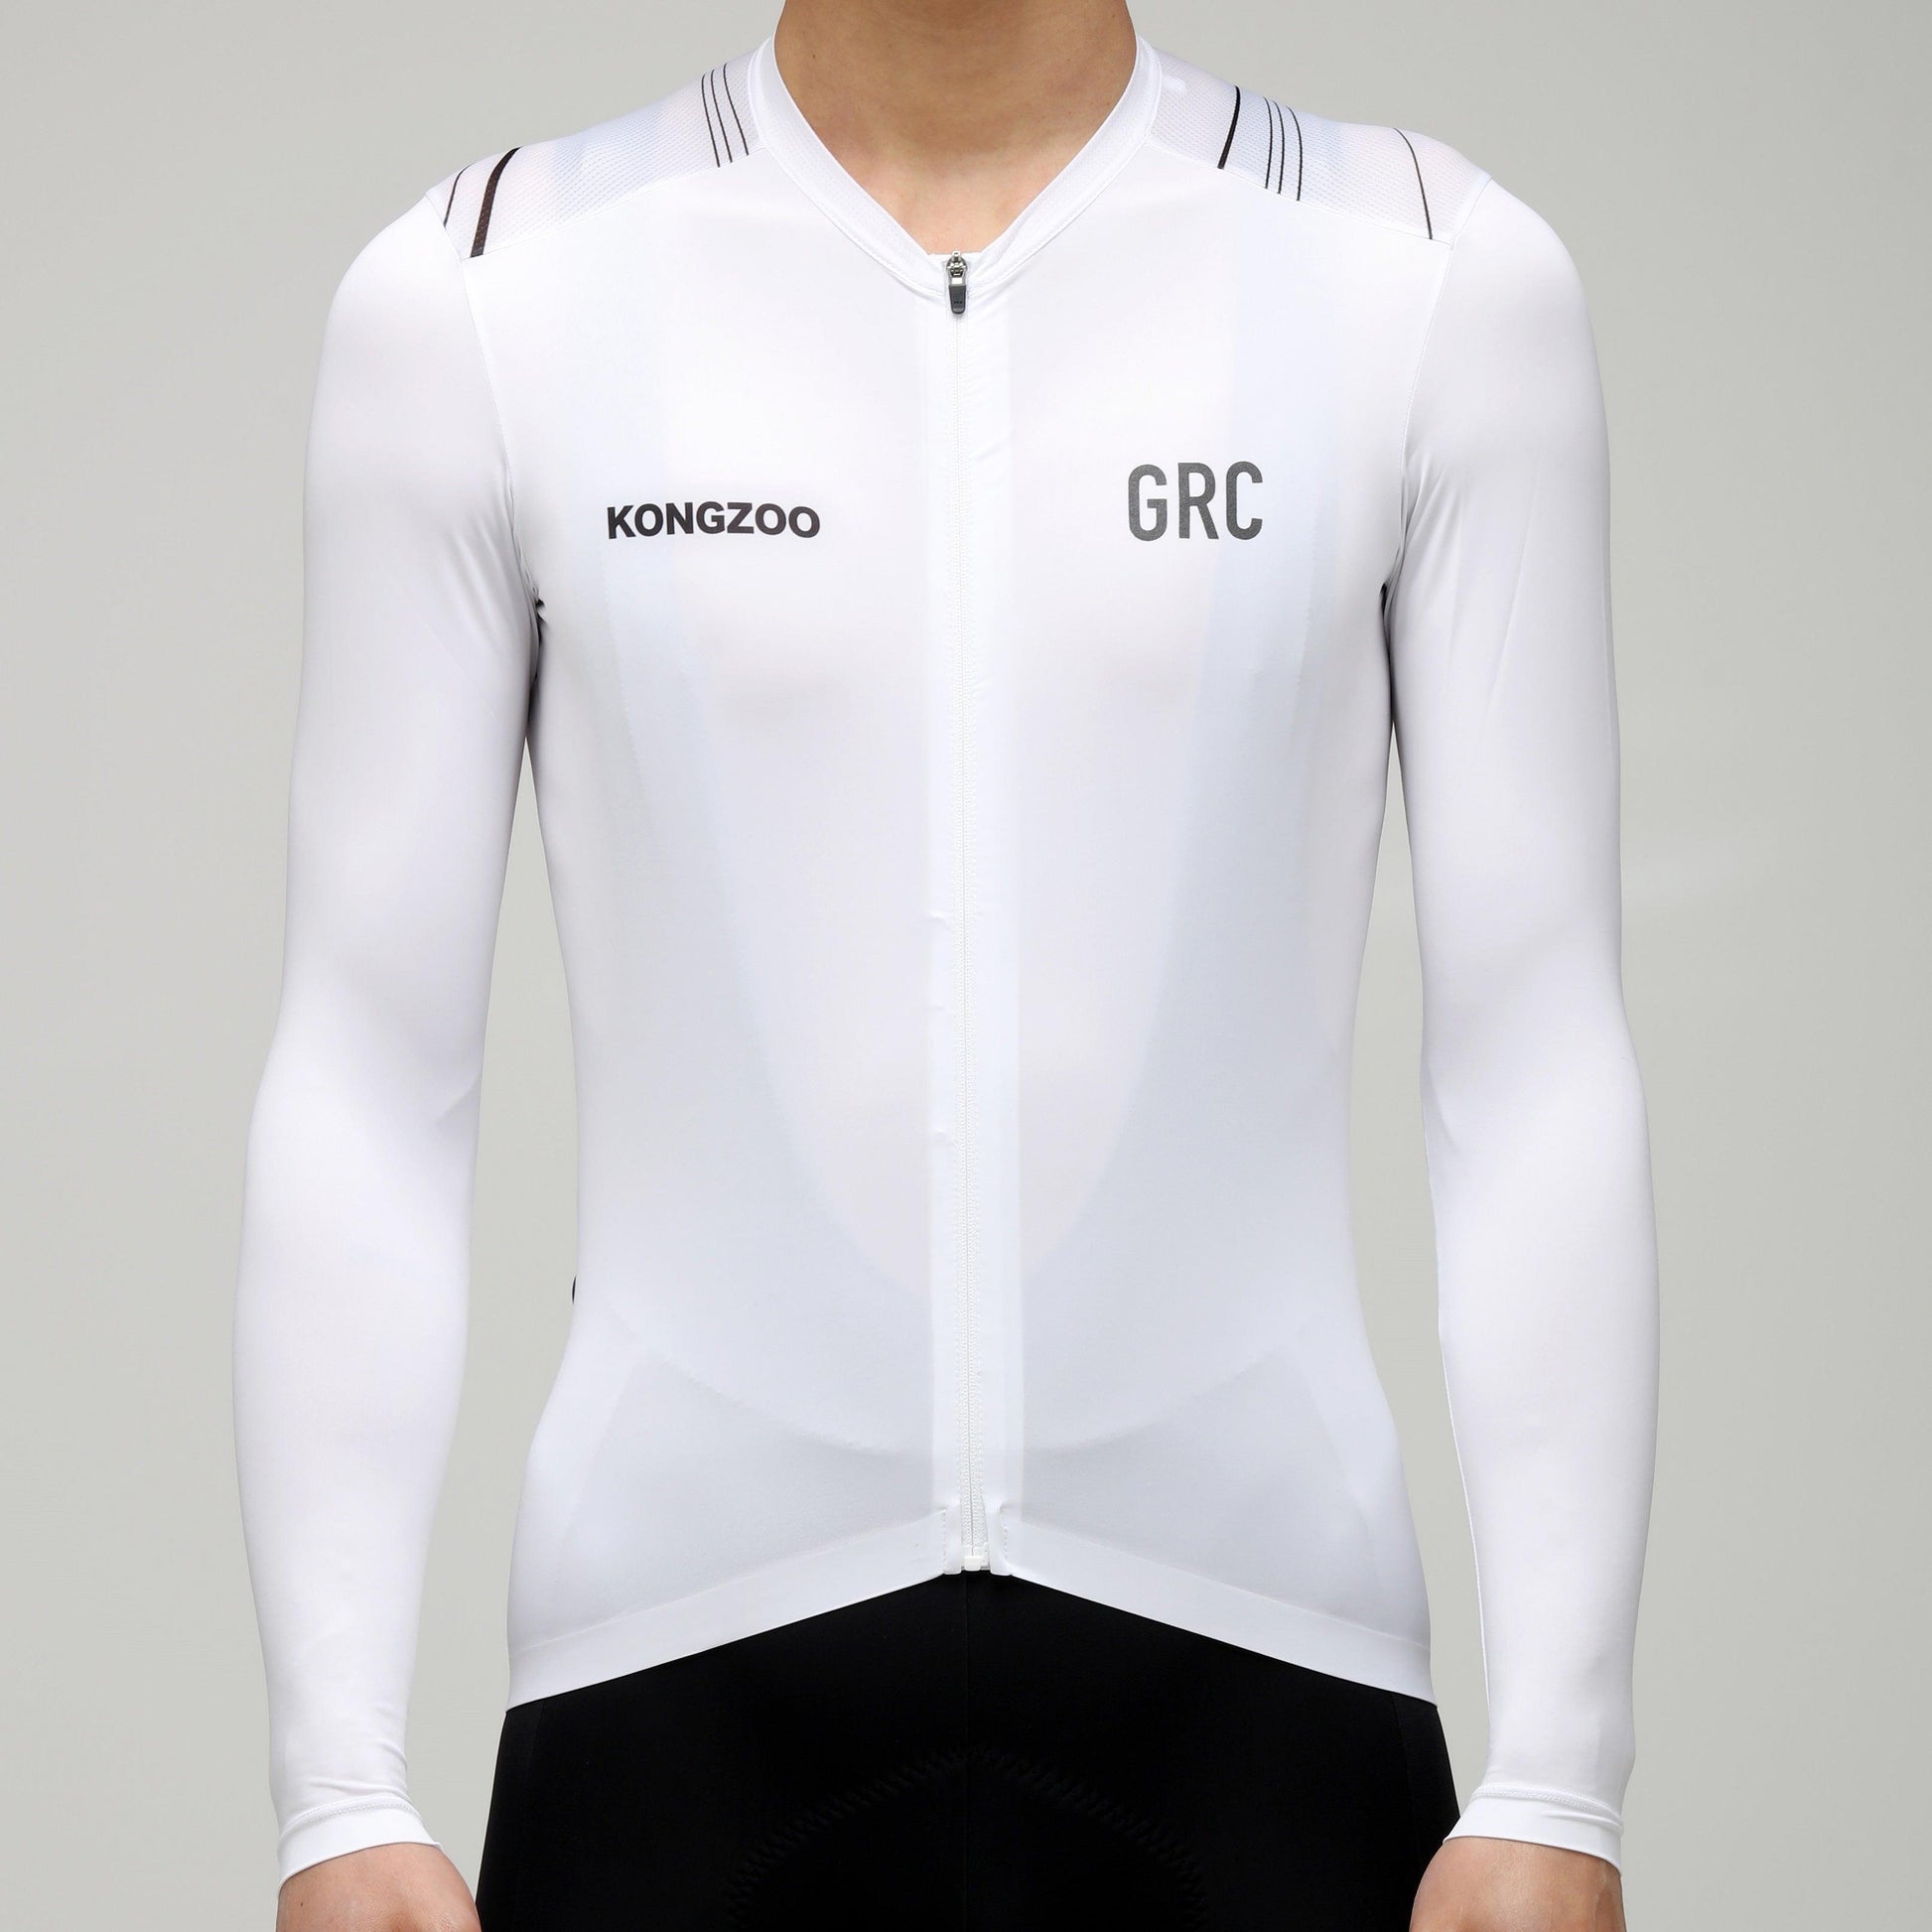 GRC Long Sleeves Cycling Jersey | Black and White Cycling Jersey | Co-Branded Tiger Design Cycling Jersey 